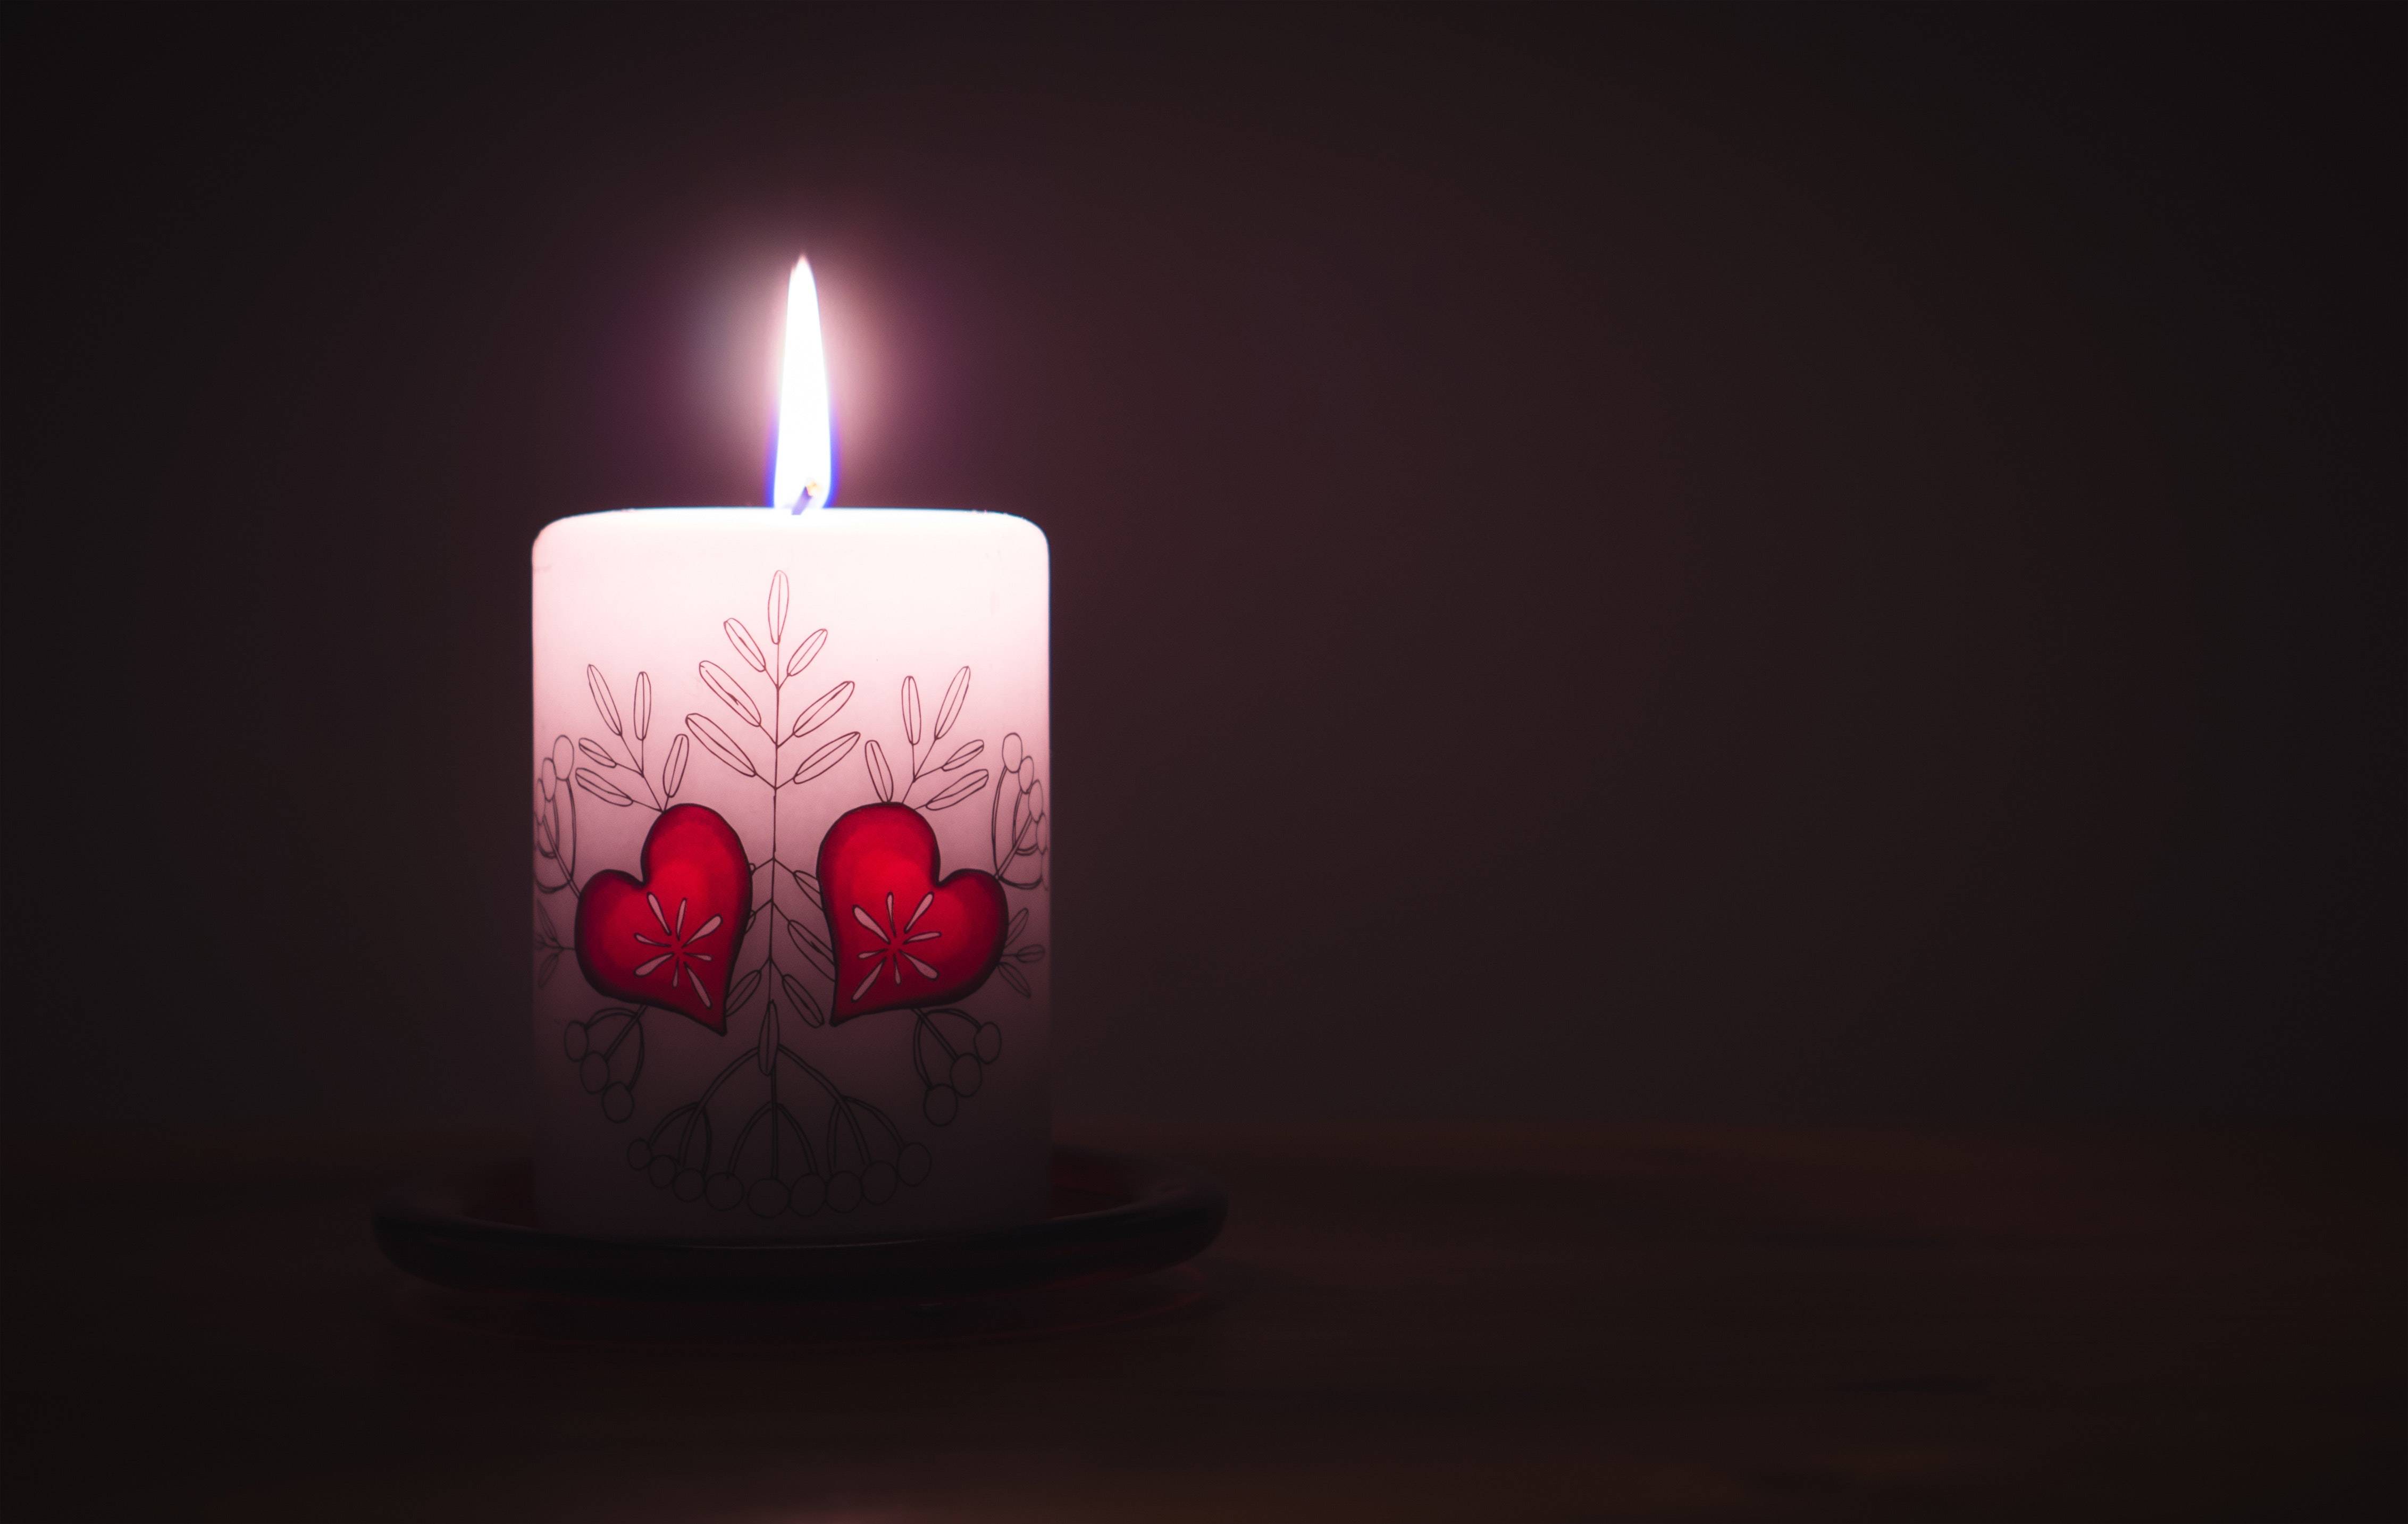 Single candle with two red hearts on it, against black backdrop